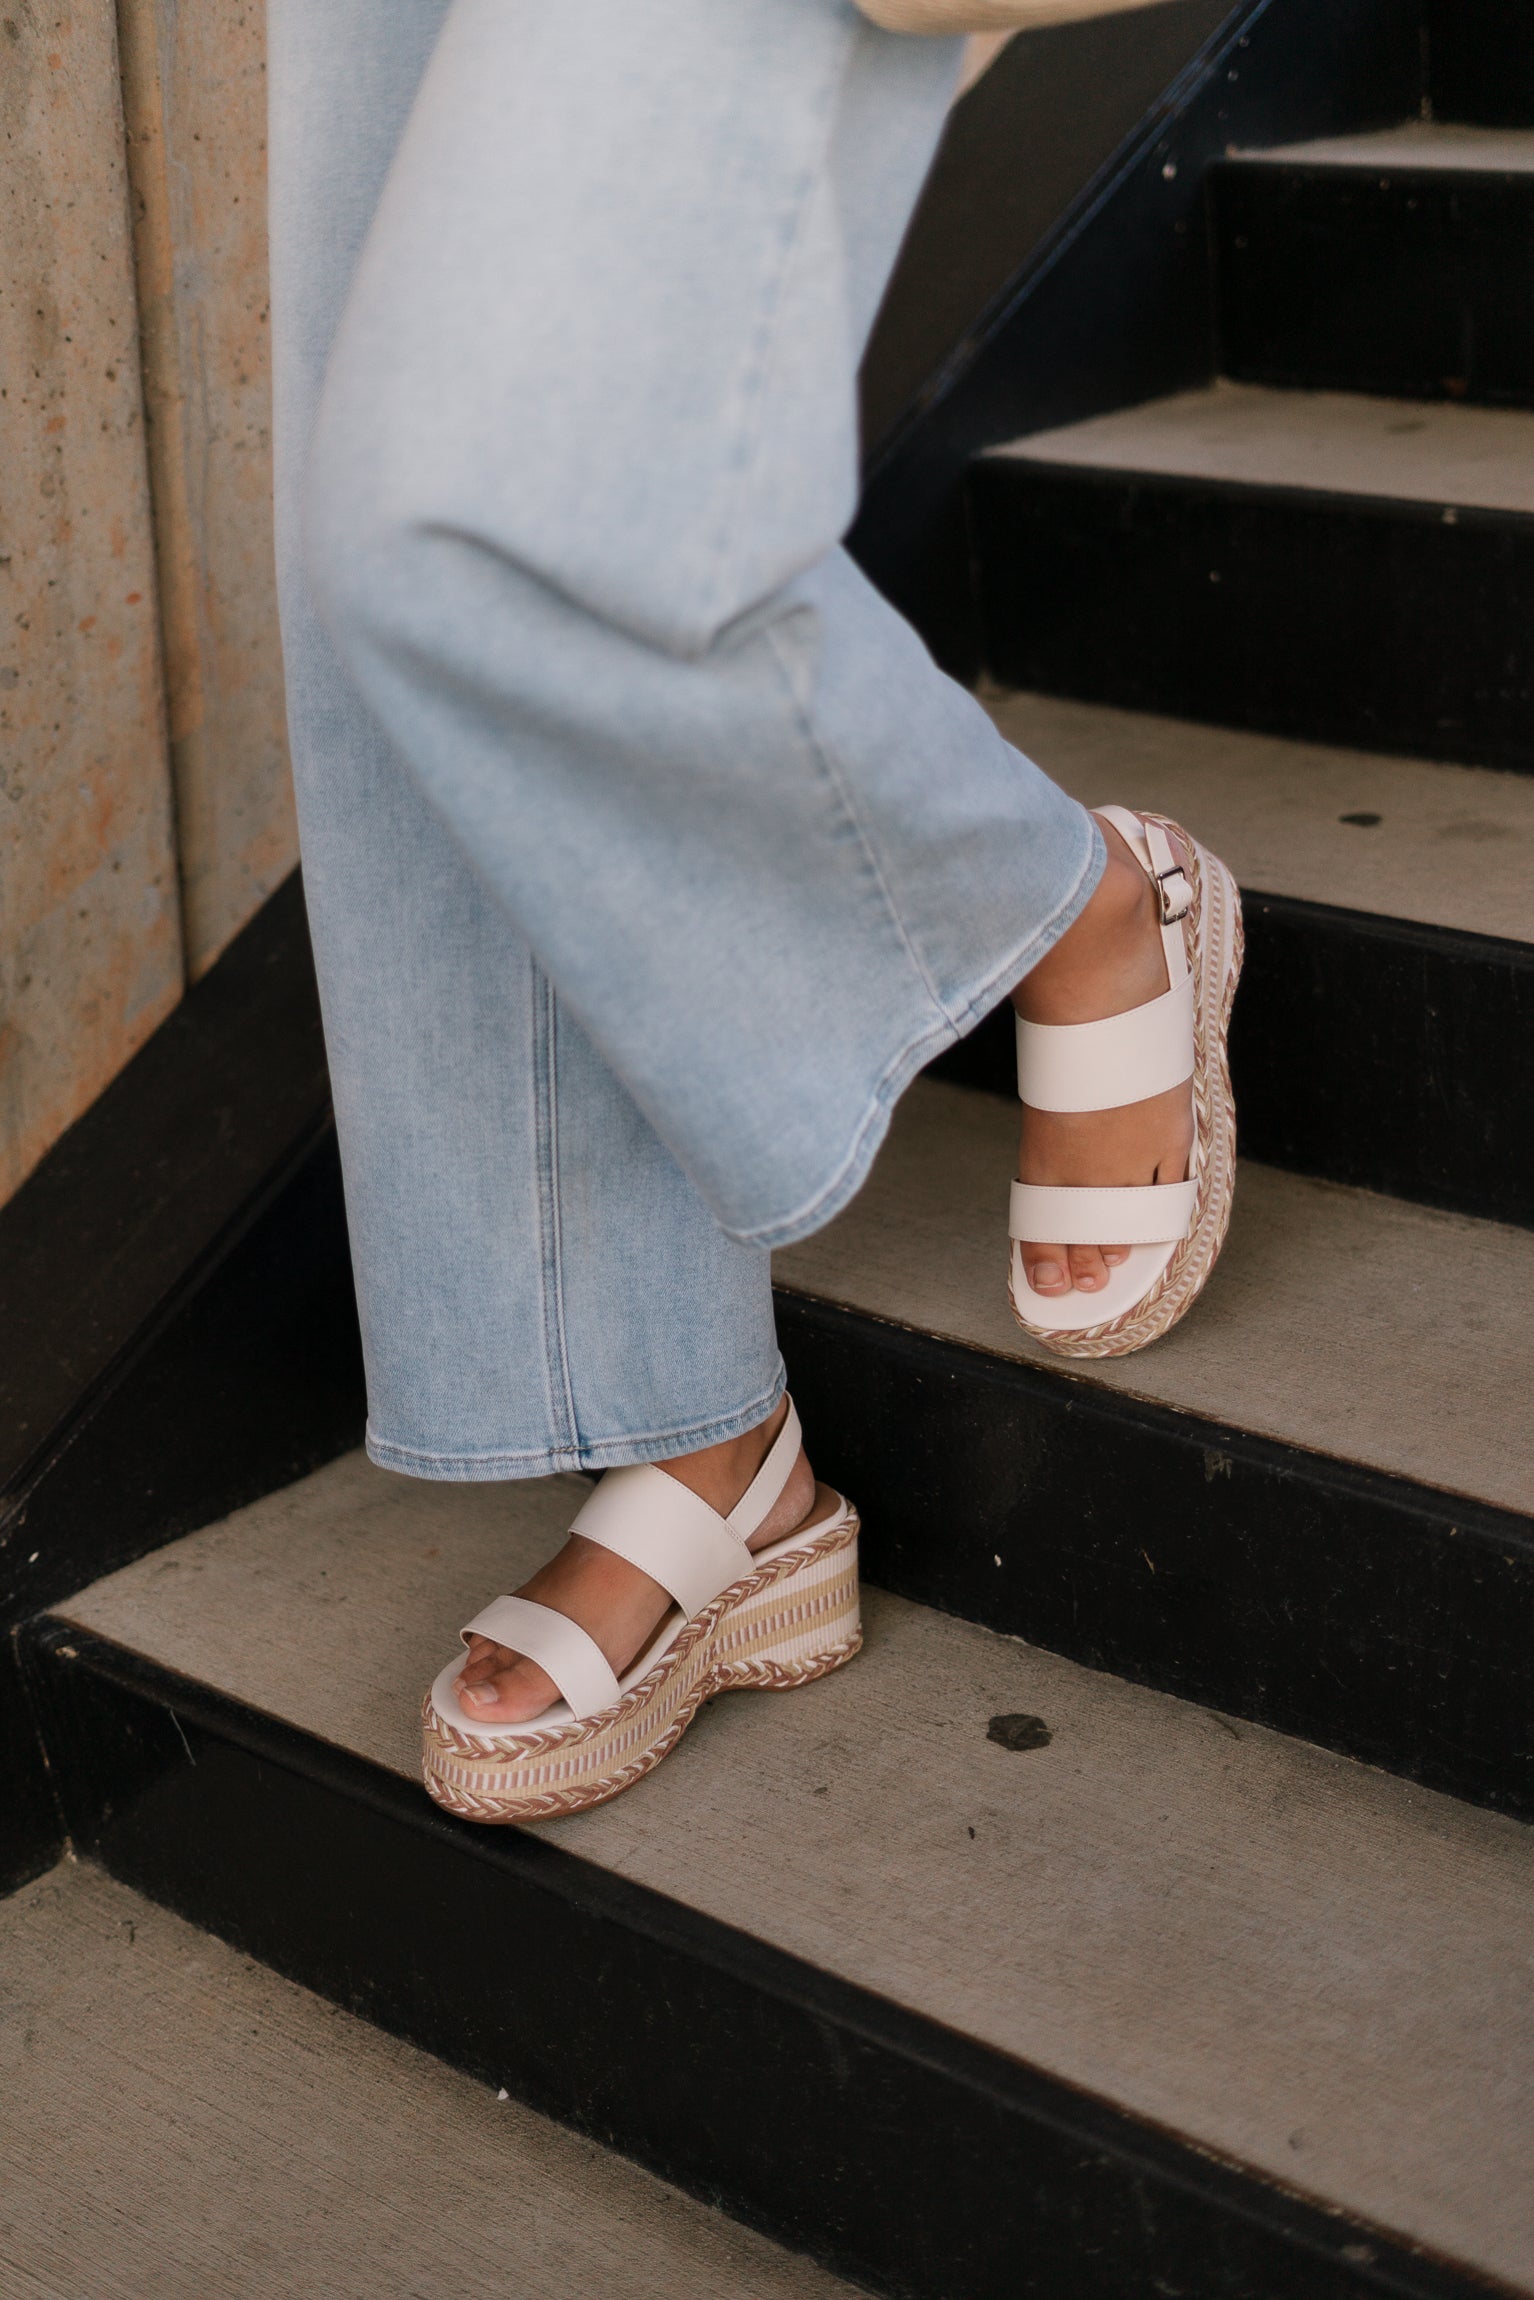 Front side view of female model wearing the Surrey Platform Sandal in Ivory which features Ivory Leather Upper Straps, Adjustable Buckle Back Strap, Memory Foam and Ivory and Tan Texture Espadrille Sole